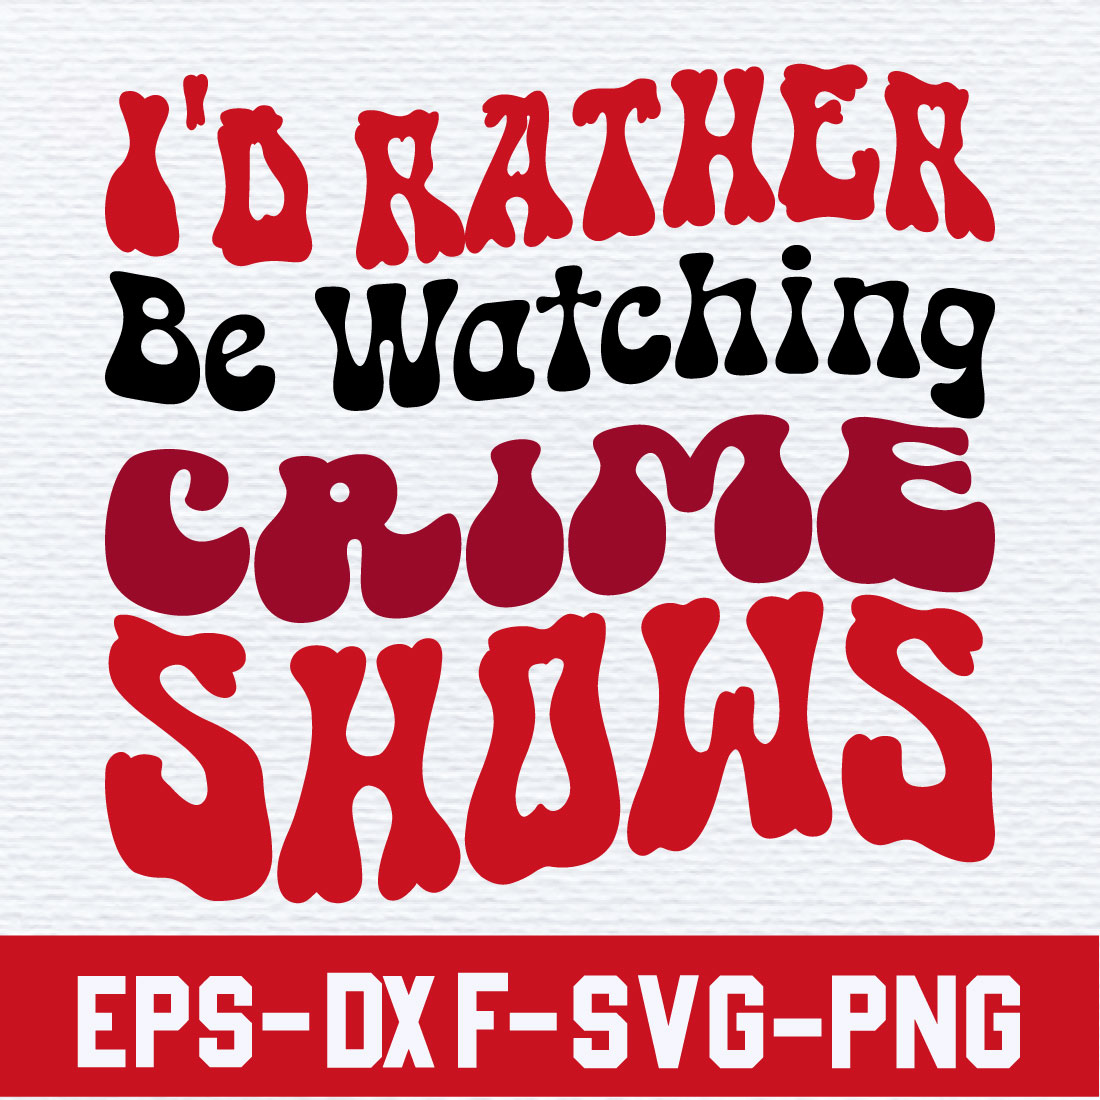 I'd rather Be Watching Crime Shows preview image.